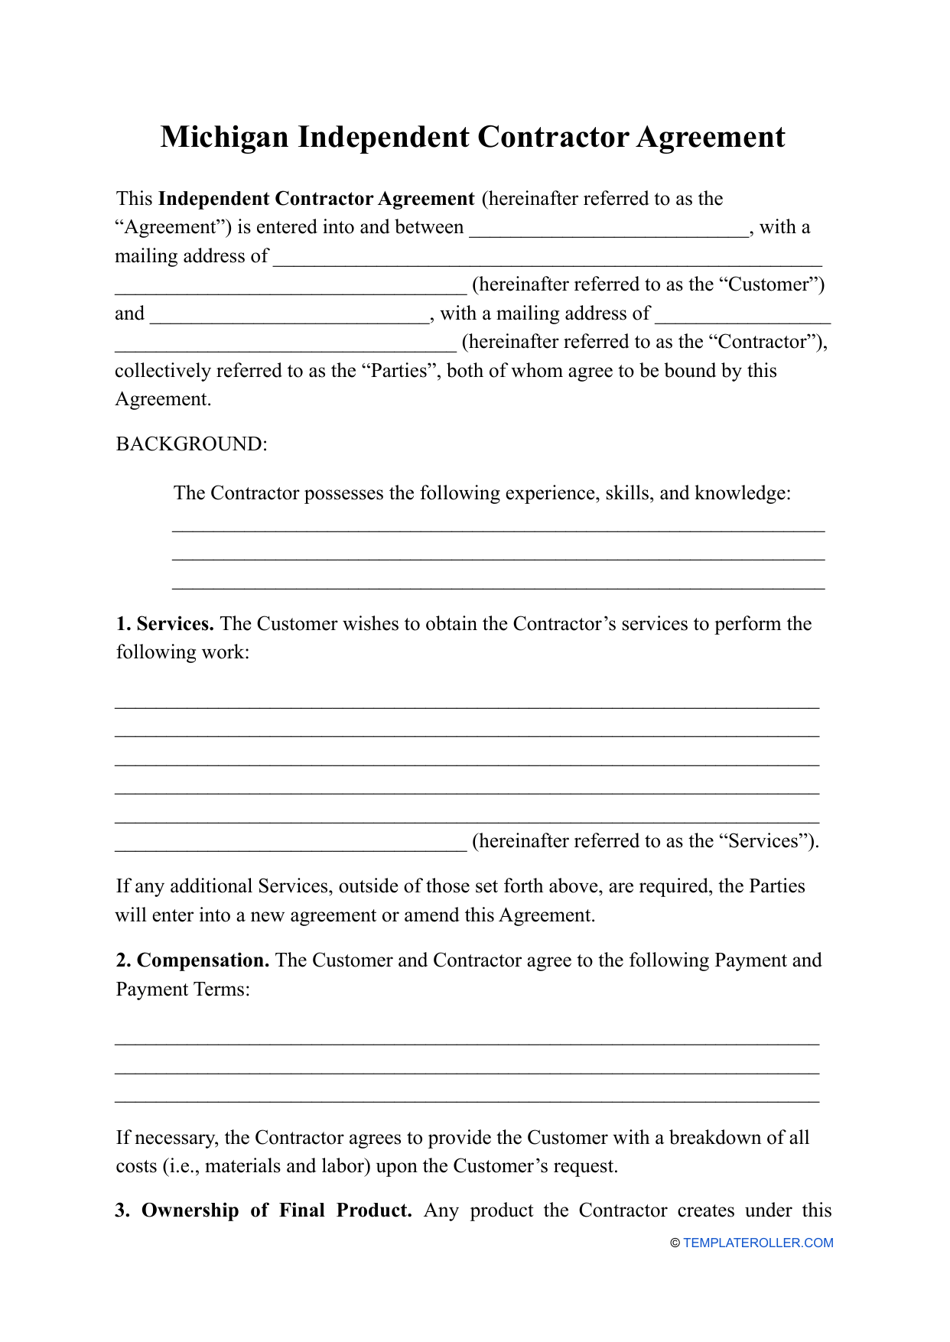 Independent Contractor Agreement Template - Michigan, Page 1